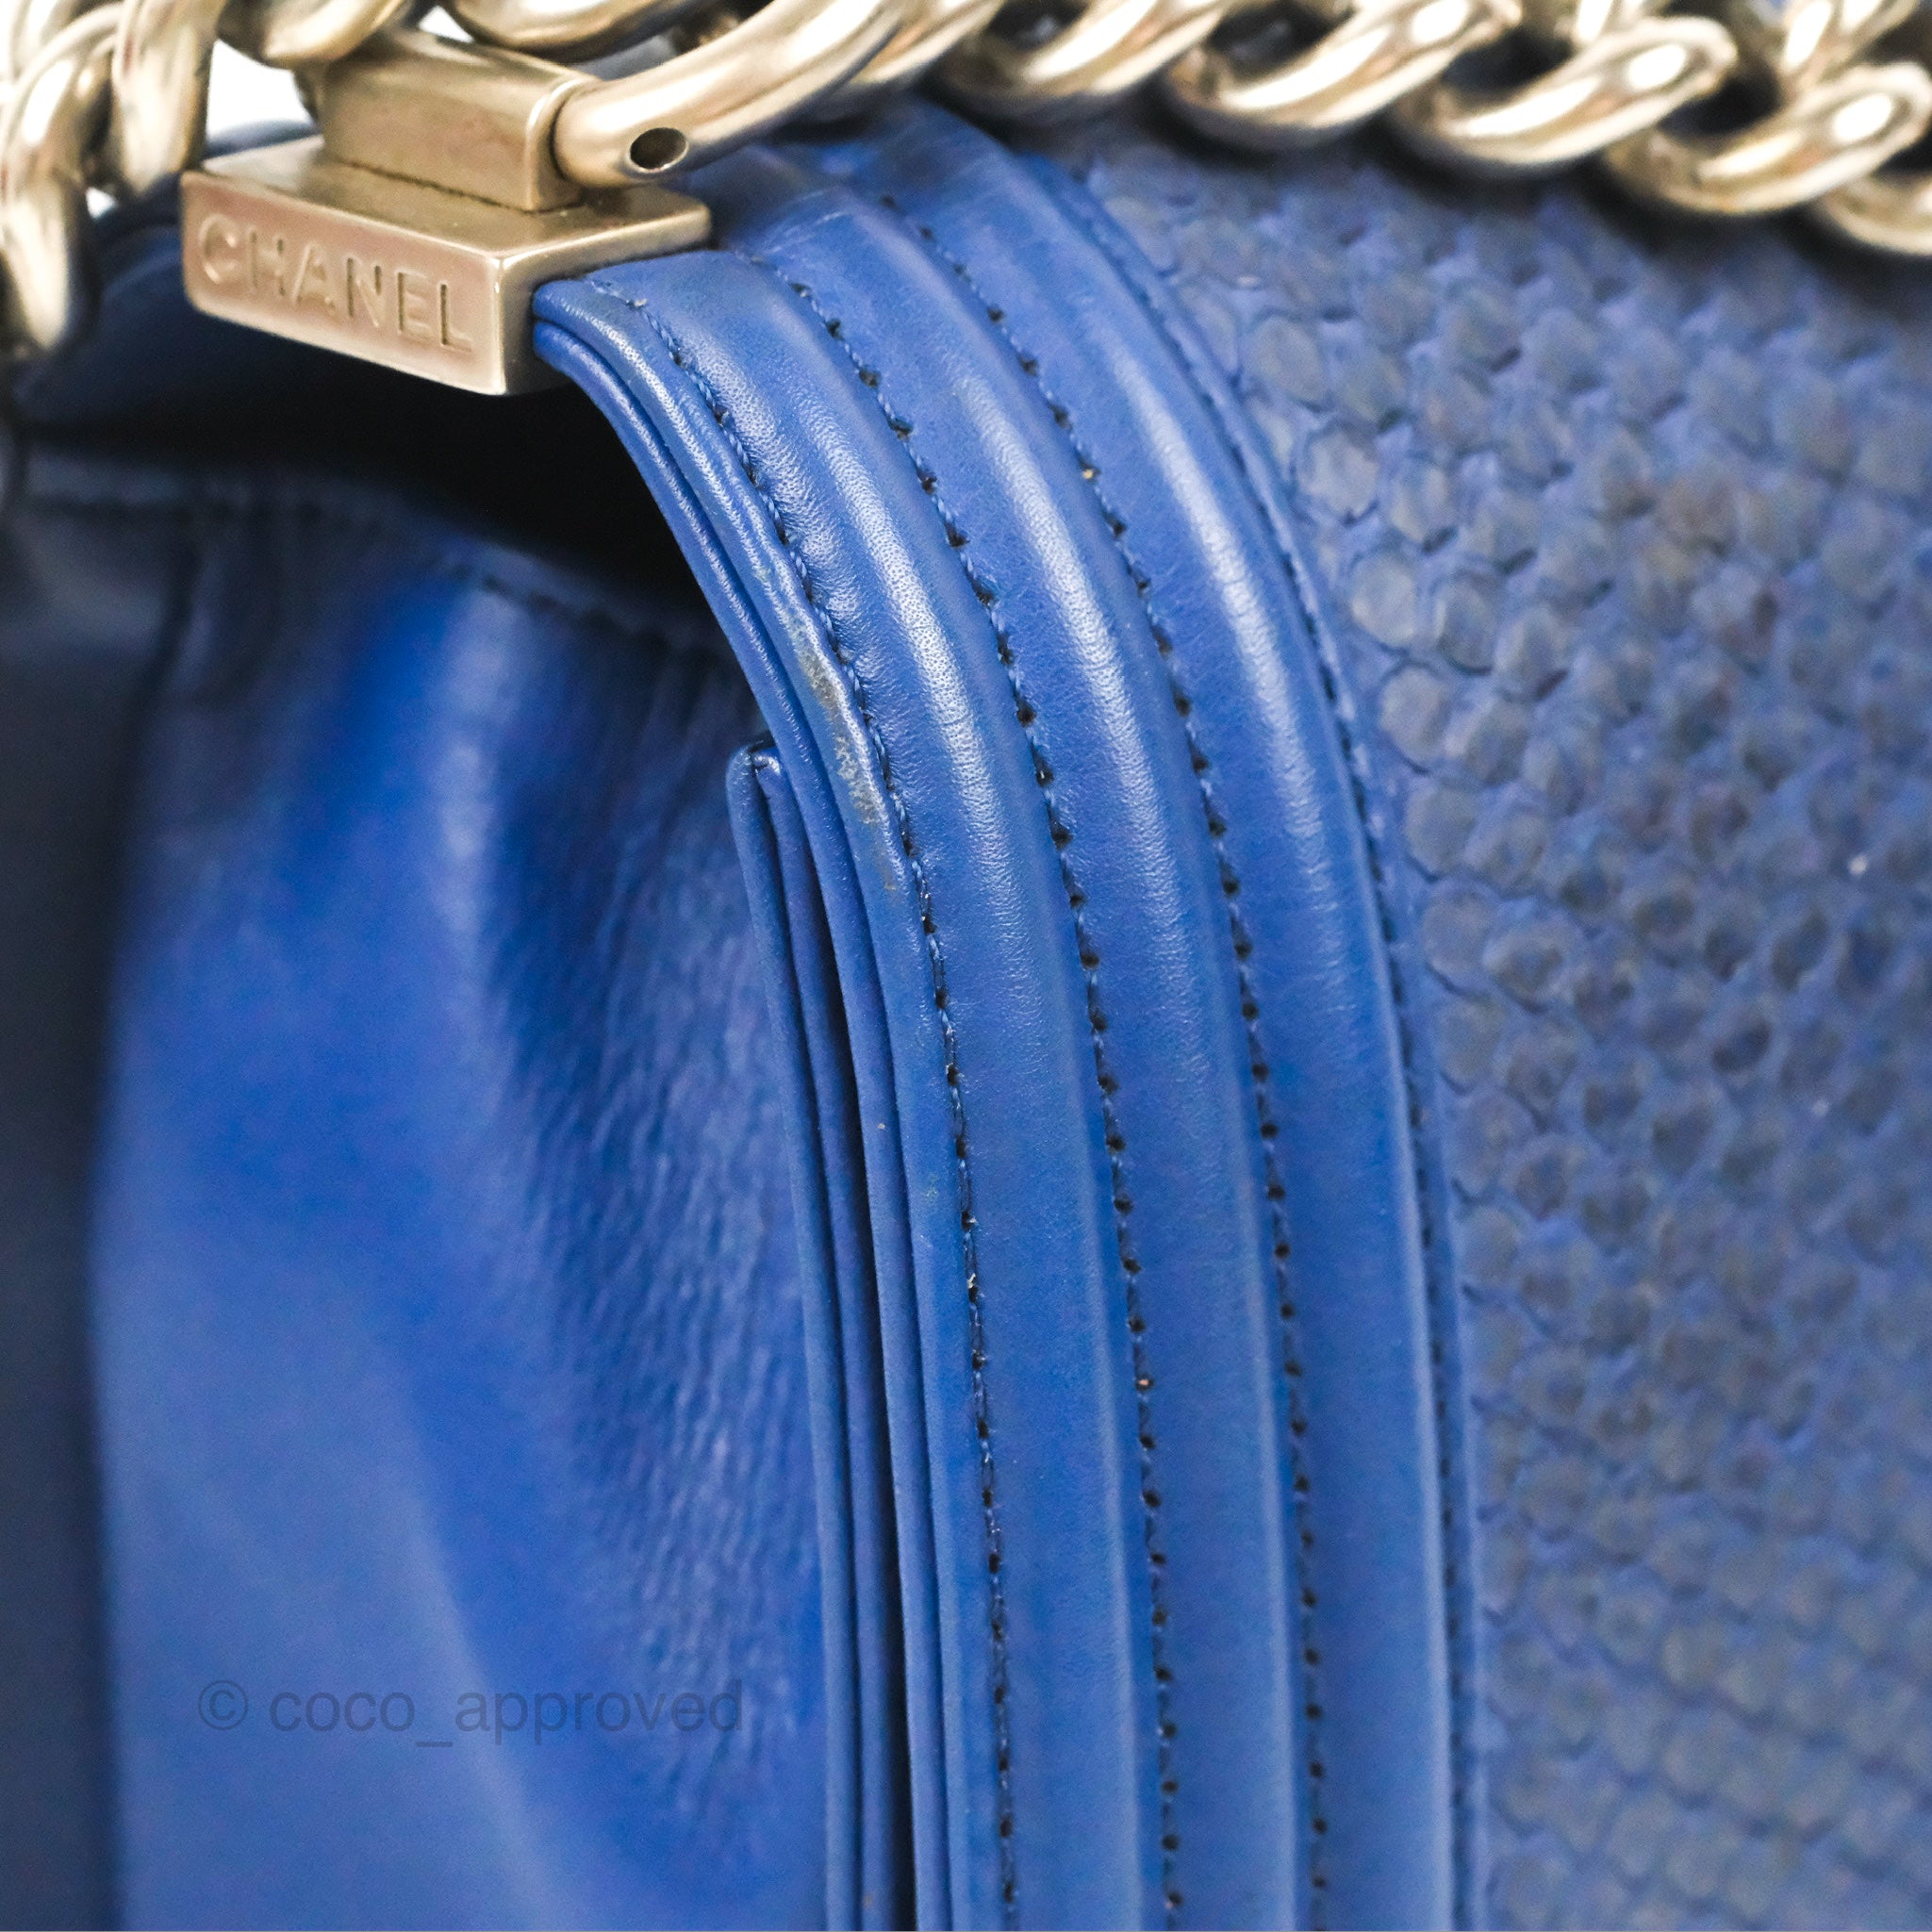 Chanel Bags – Sellier